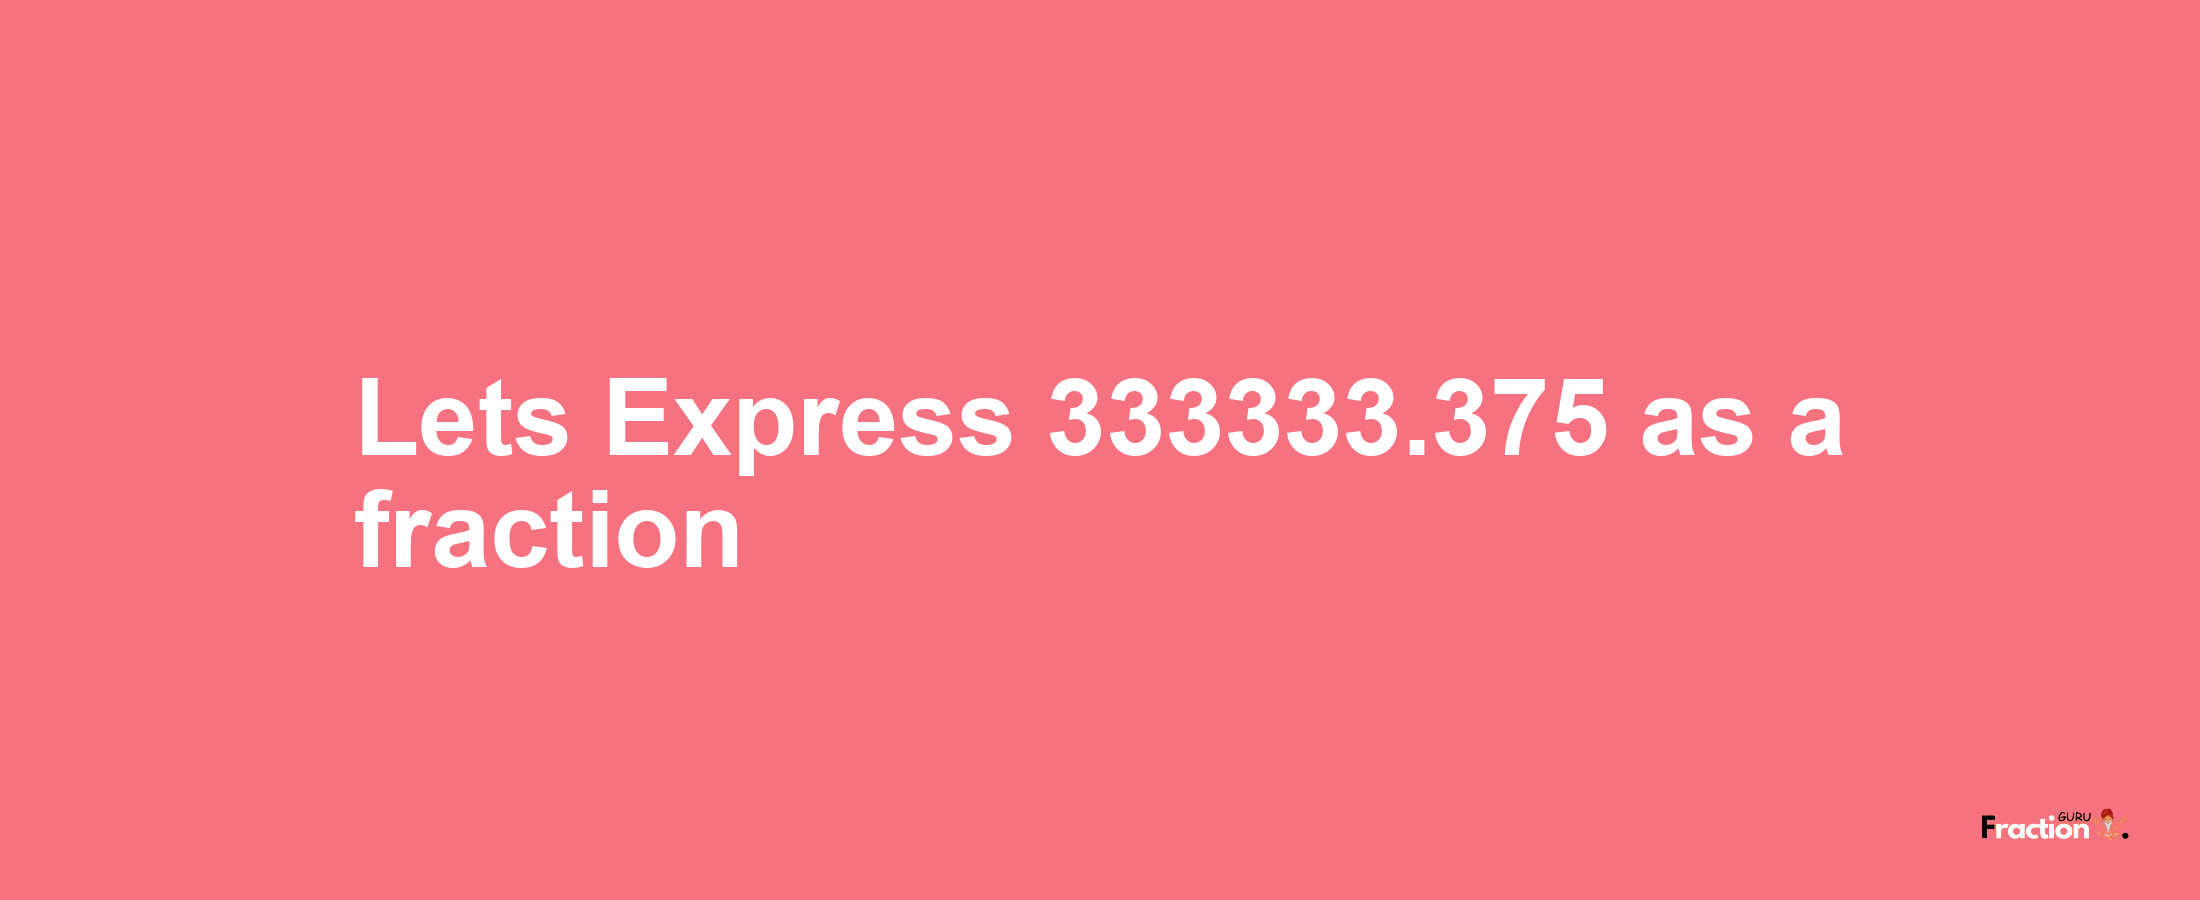 Lets Express 333333.375 as afraction